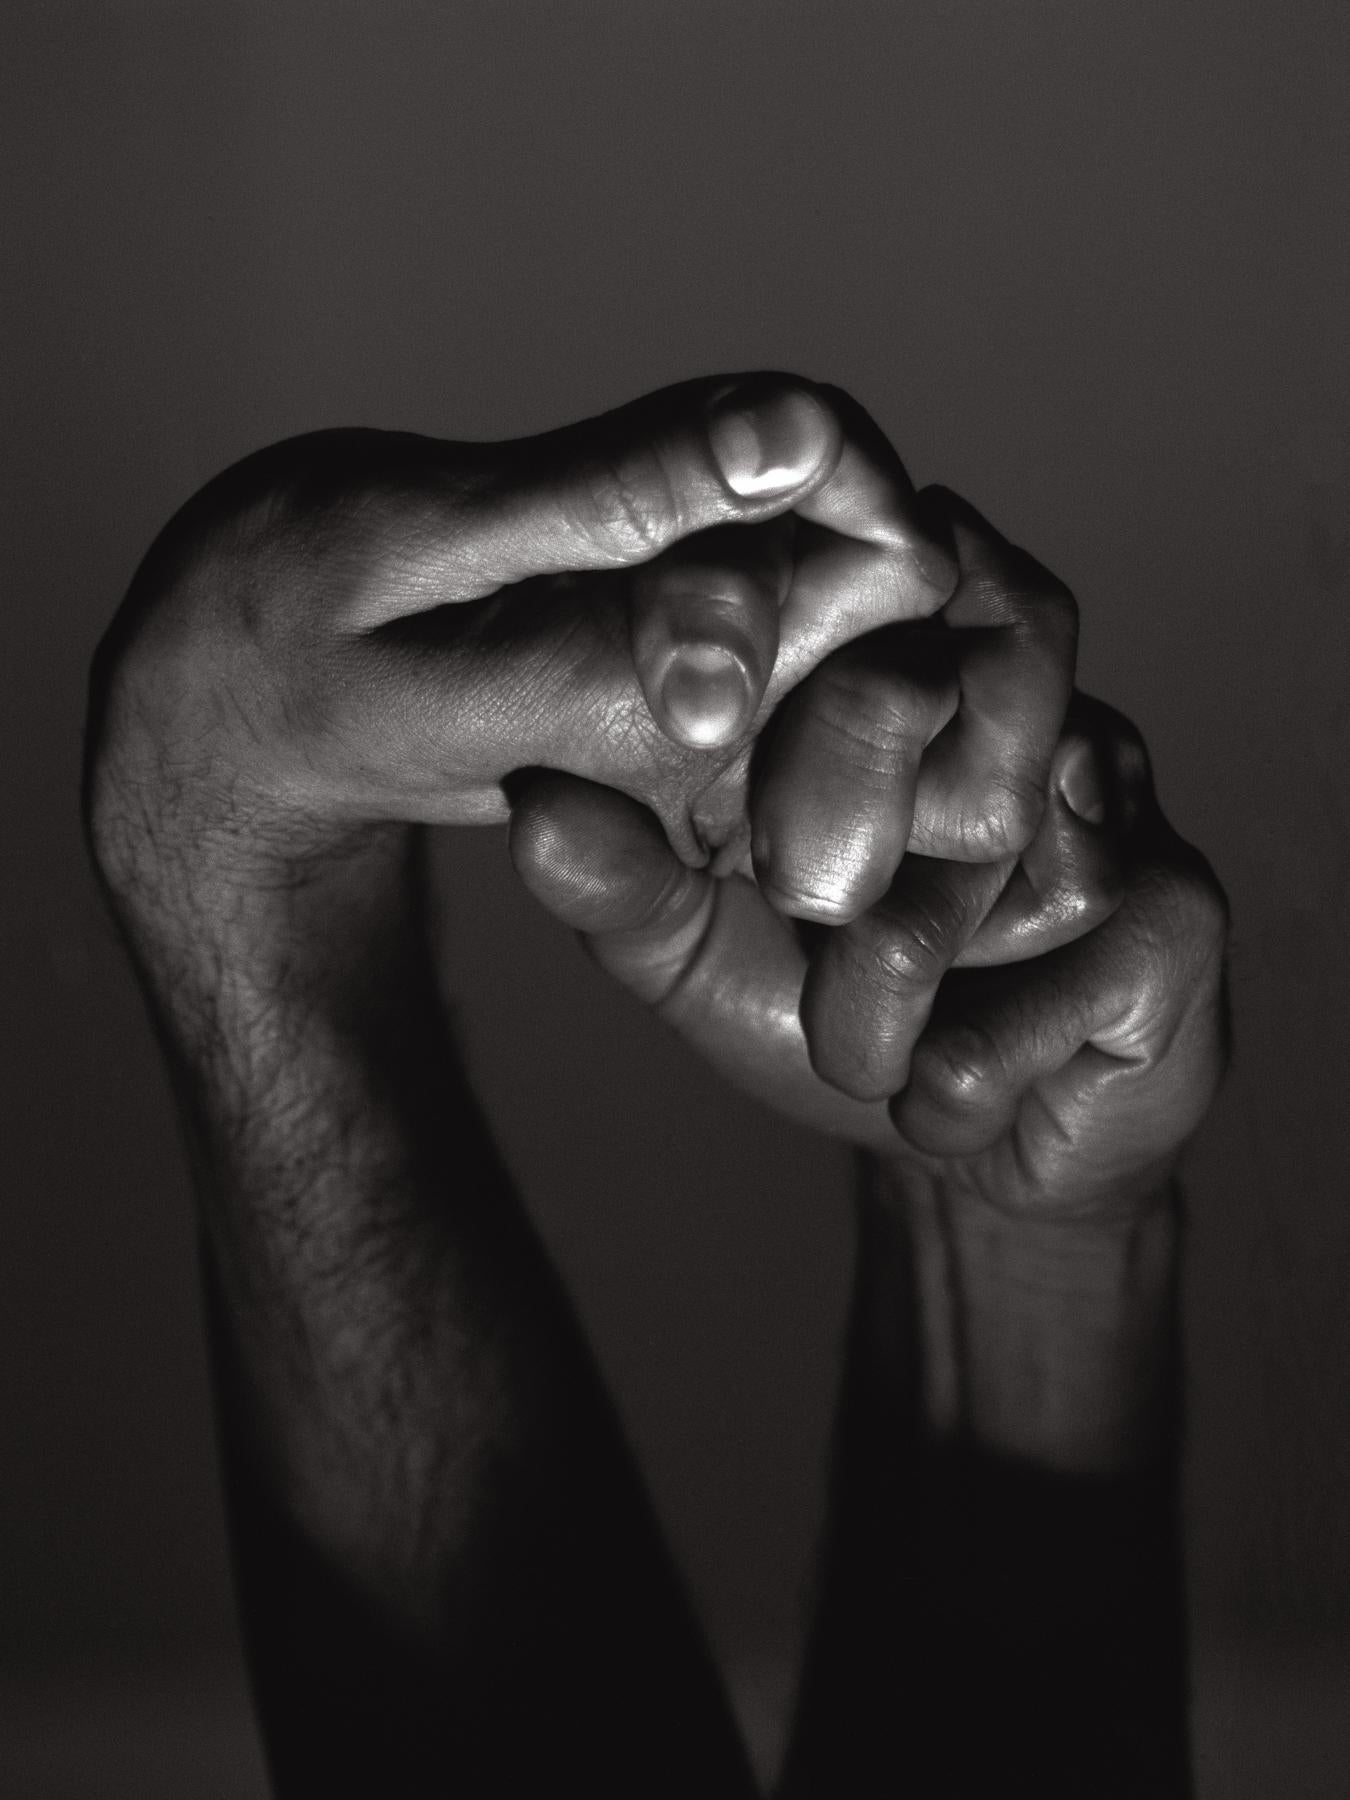 Hands Together - Intertwined Hands, Silver Gelatin Print, Matted and Framed